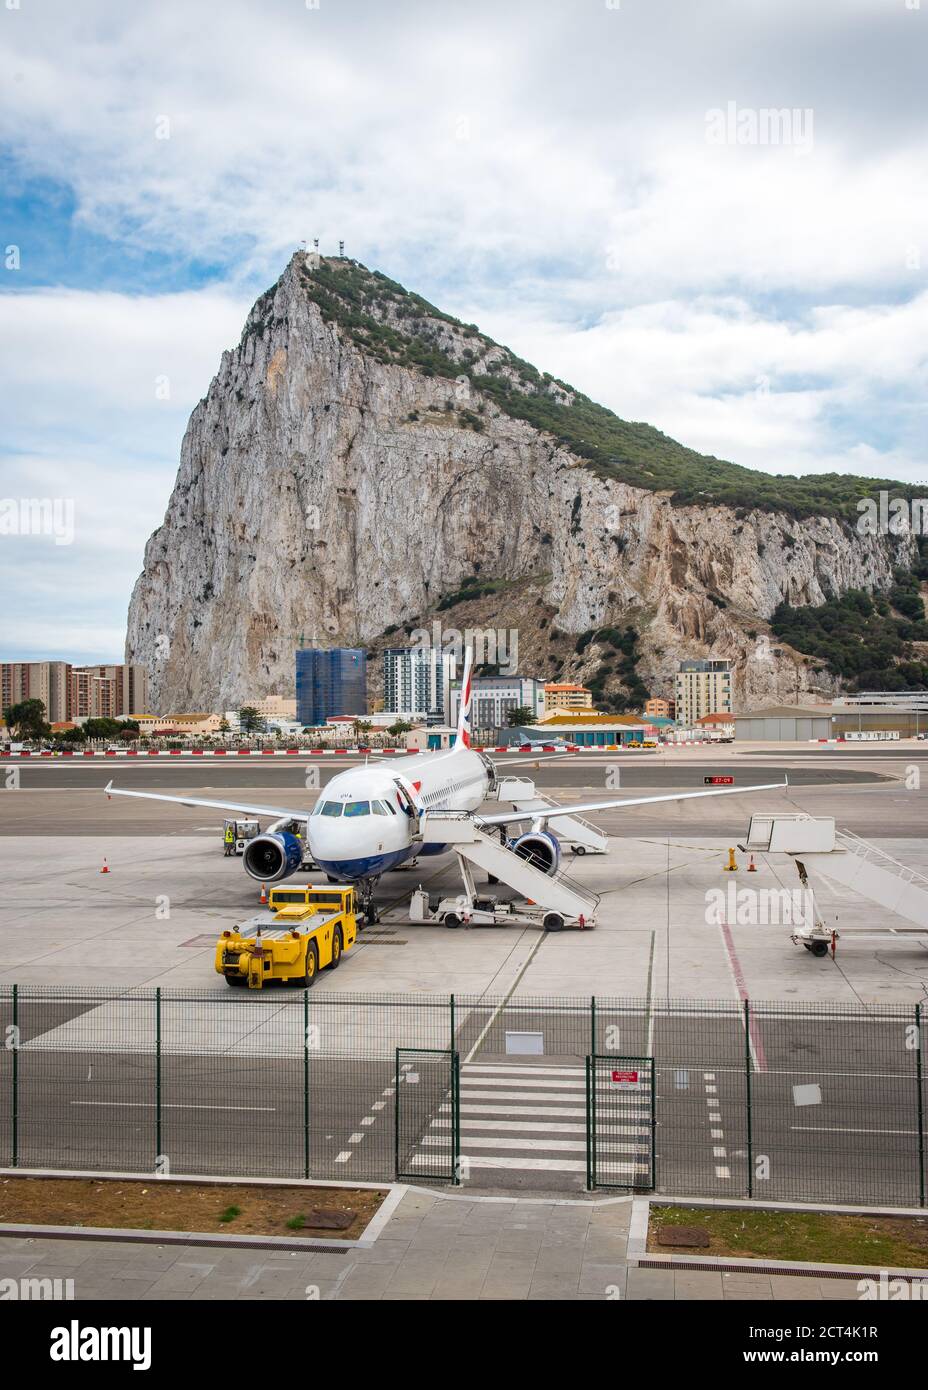 Aeroplane at Gibraltar Airport with view of the Rock Stock Photo